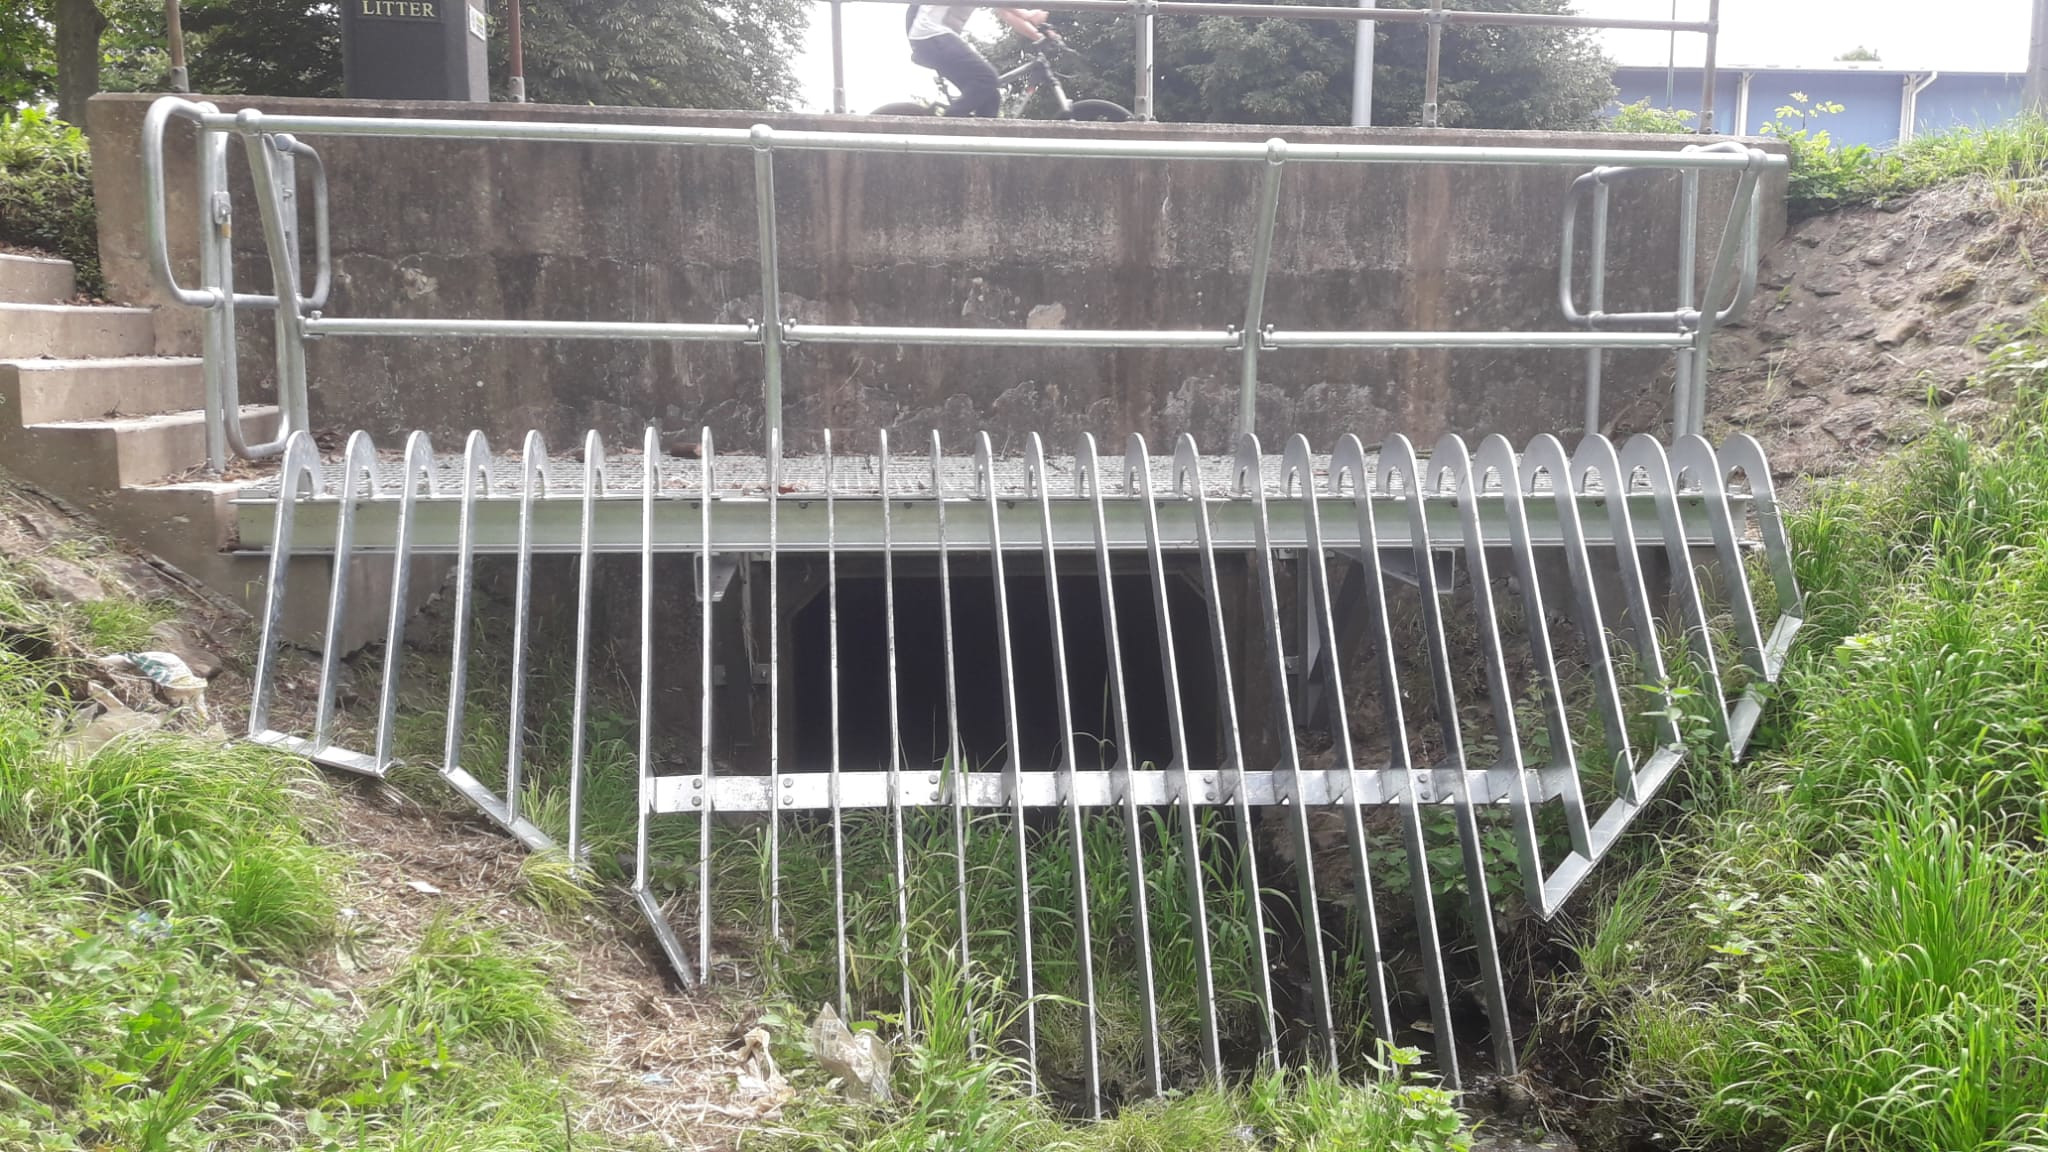 ECS Engineering Services has recently collaborated with the Environment Agency to overhaul trash screens in 17 locations throughout Nottingham.